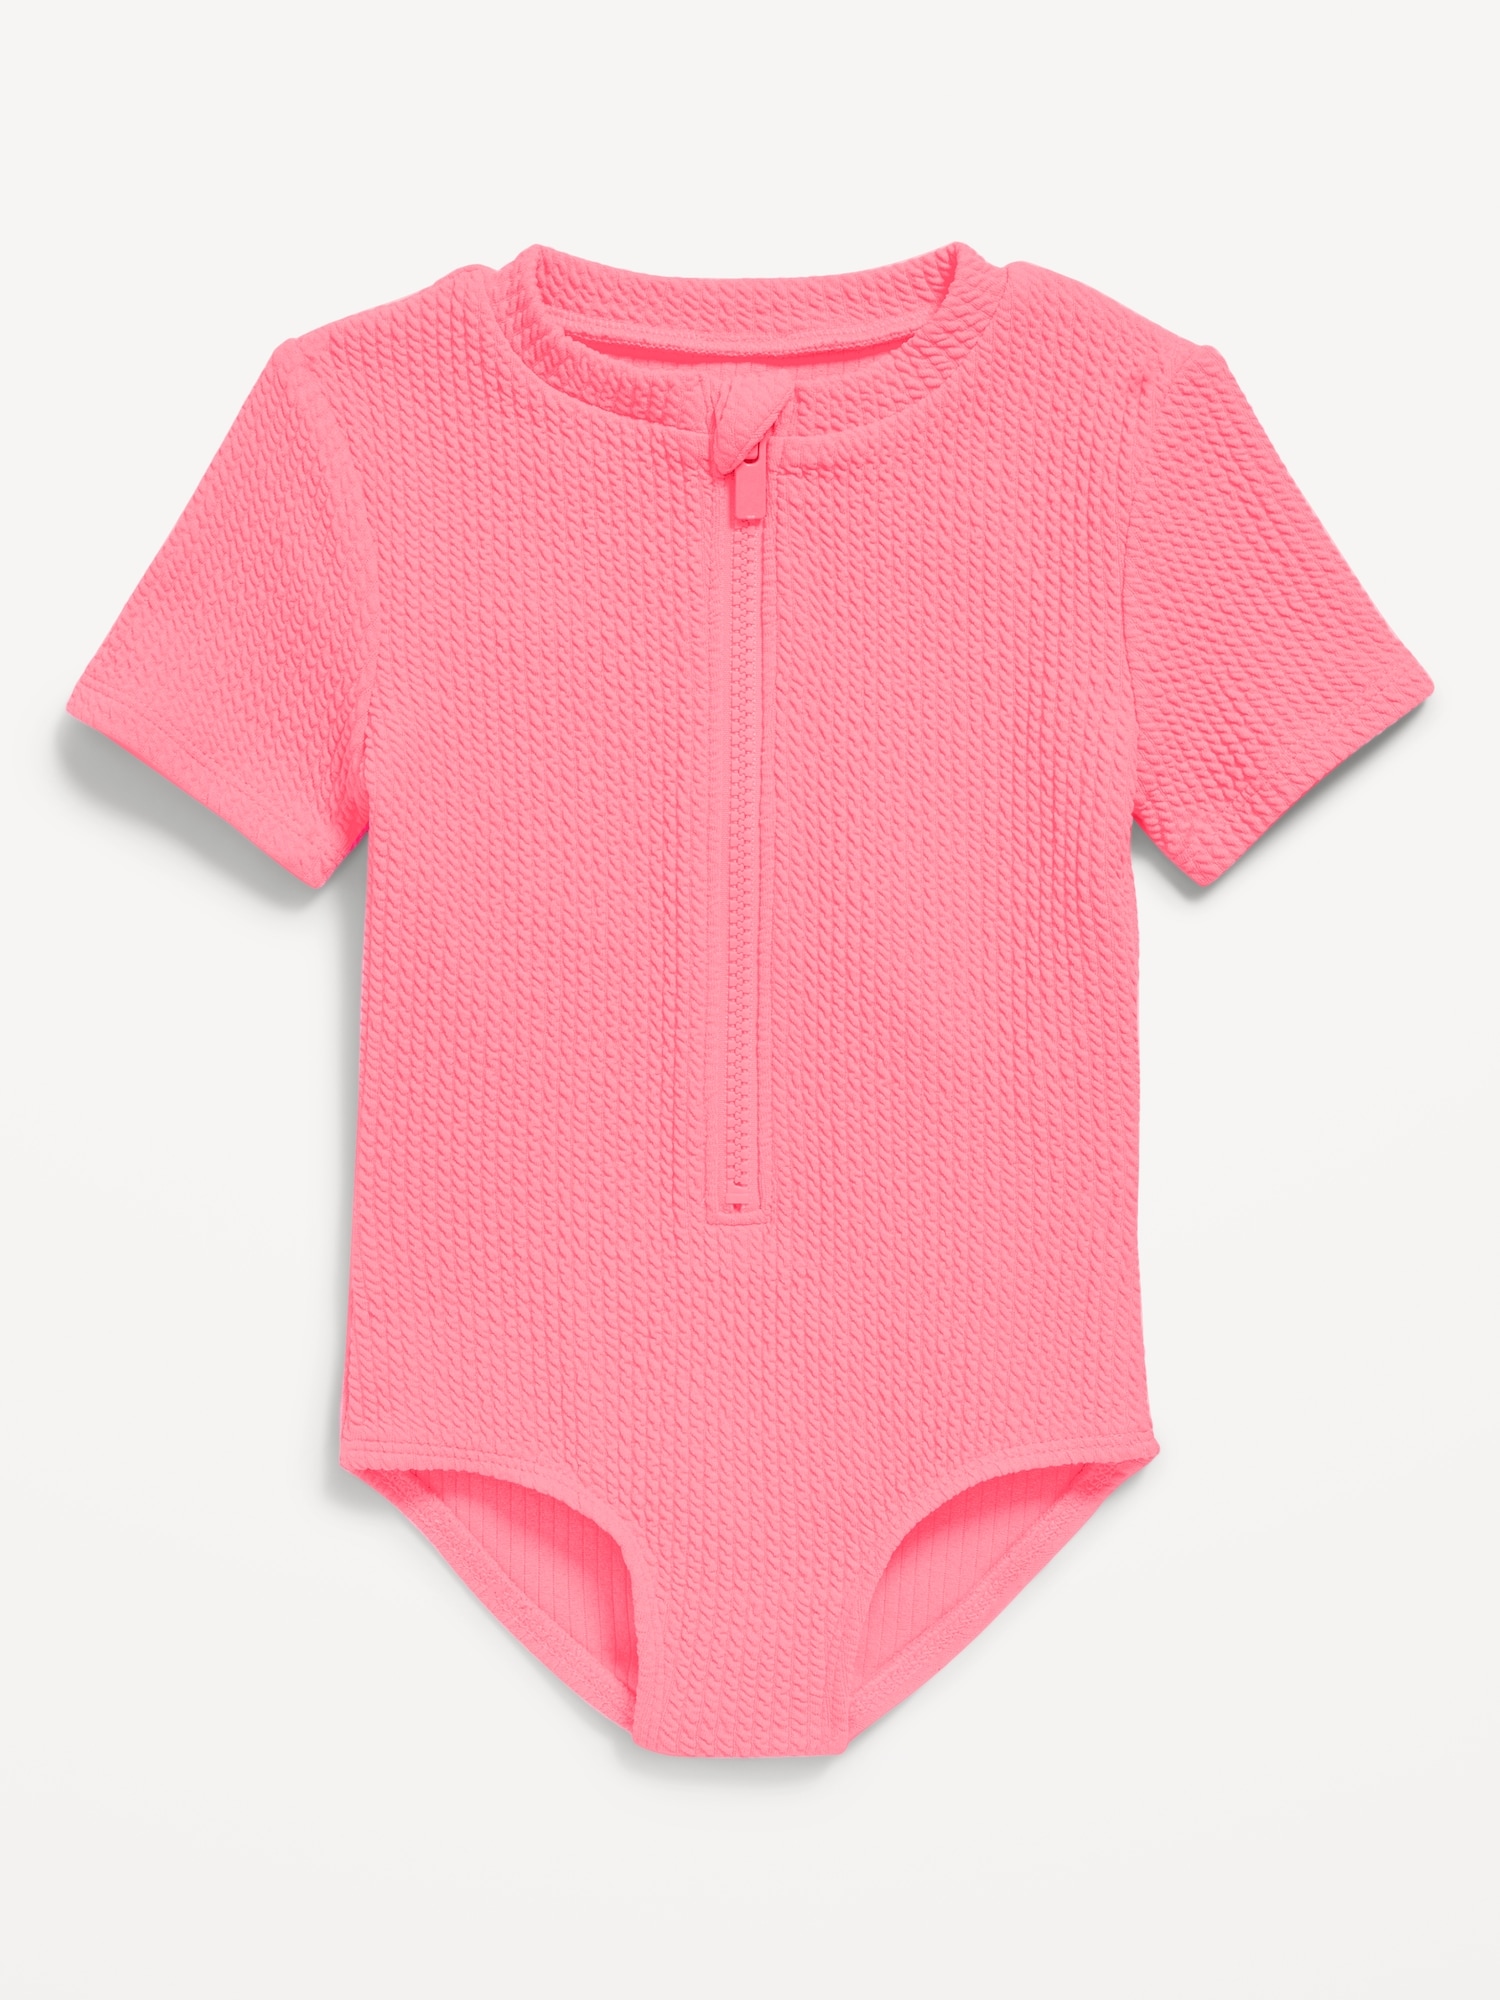 Textured Zip-Front Rashguard One-Piece Swimsuit for Toddler Girls